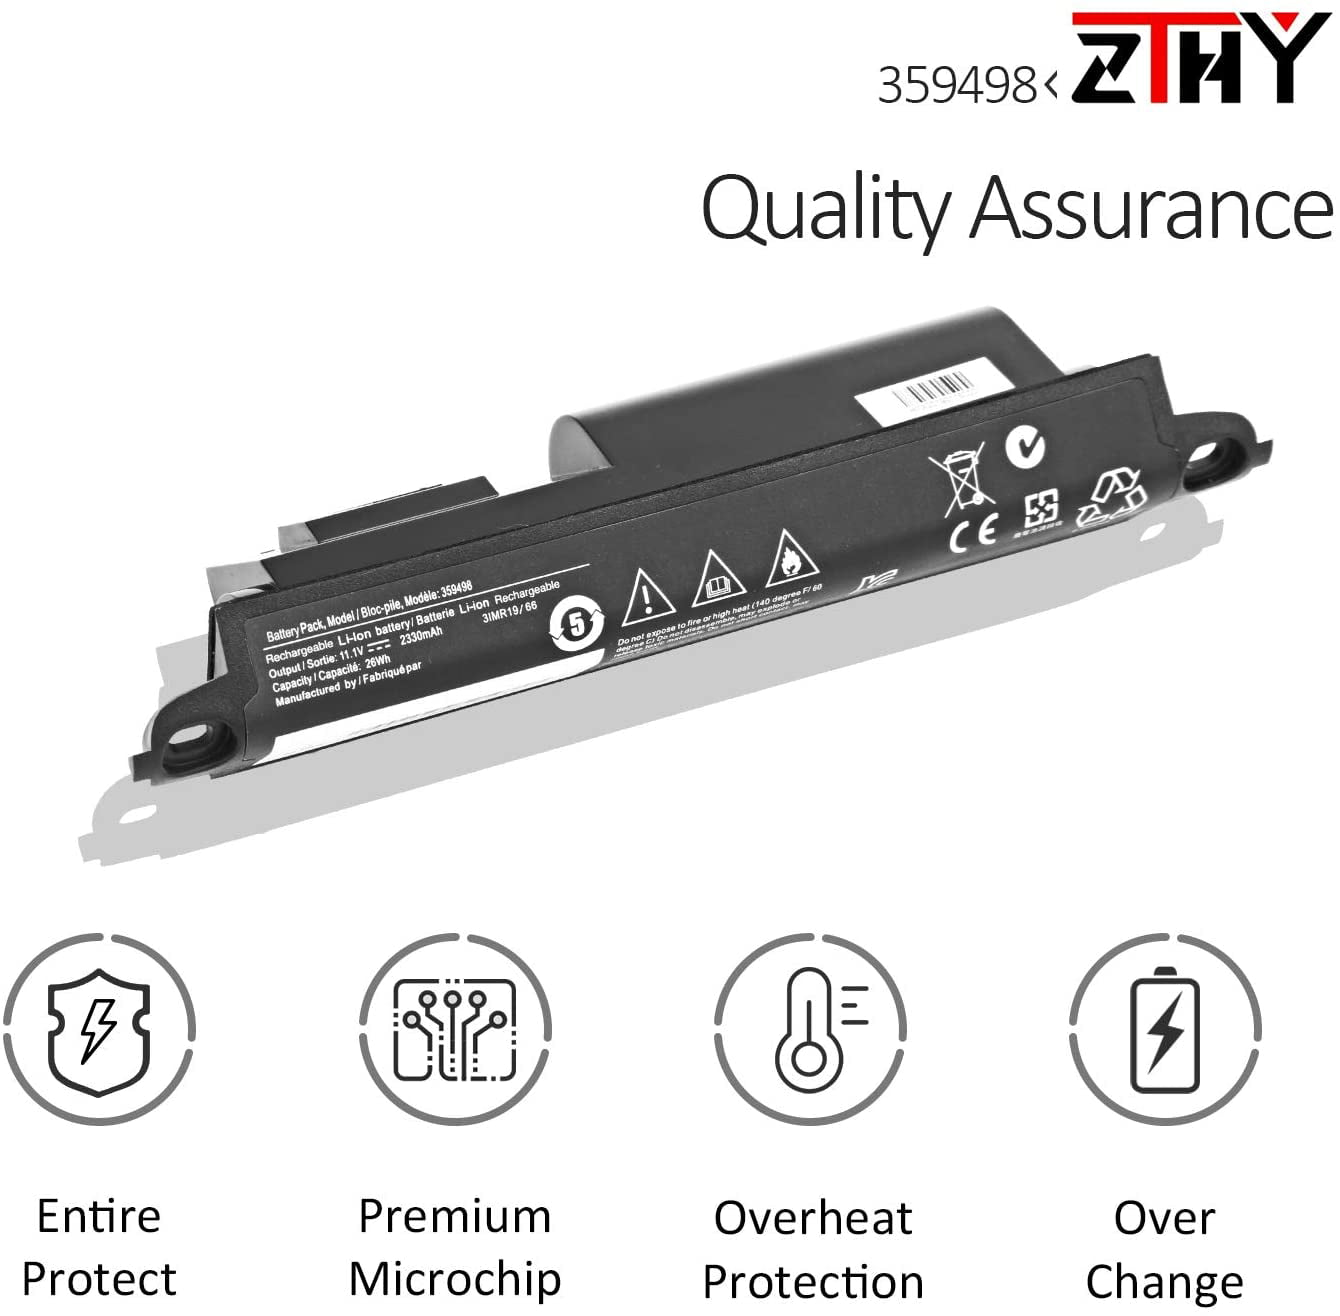 ZTHY 359498 Battery Replacement for Bose SoundLink III 330107 359498 359495 330105 330105A 330107A 0330107 Bose soundlink Mobile Speaker II 404600 11.1V 2330mAh 26Wh 